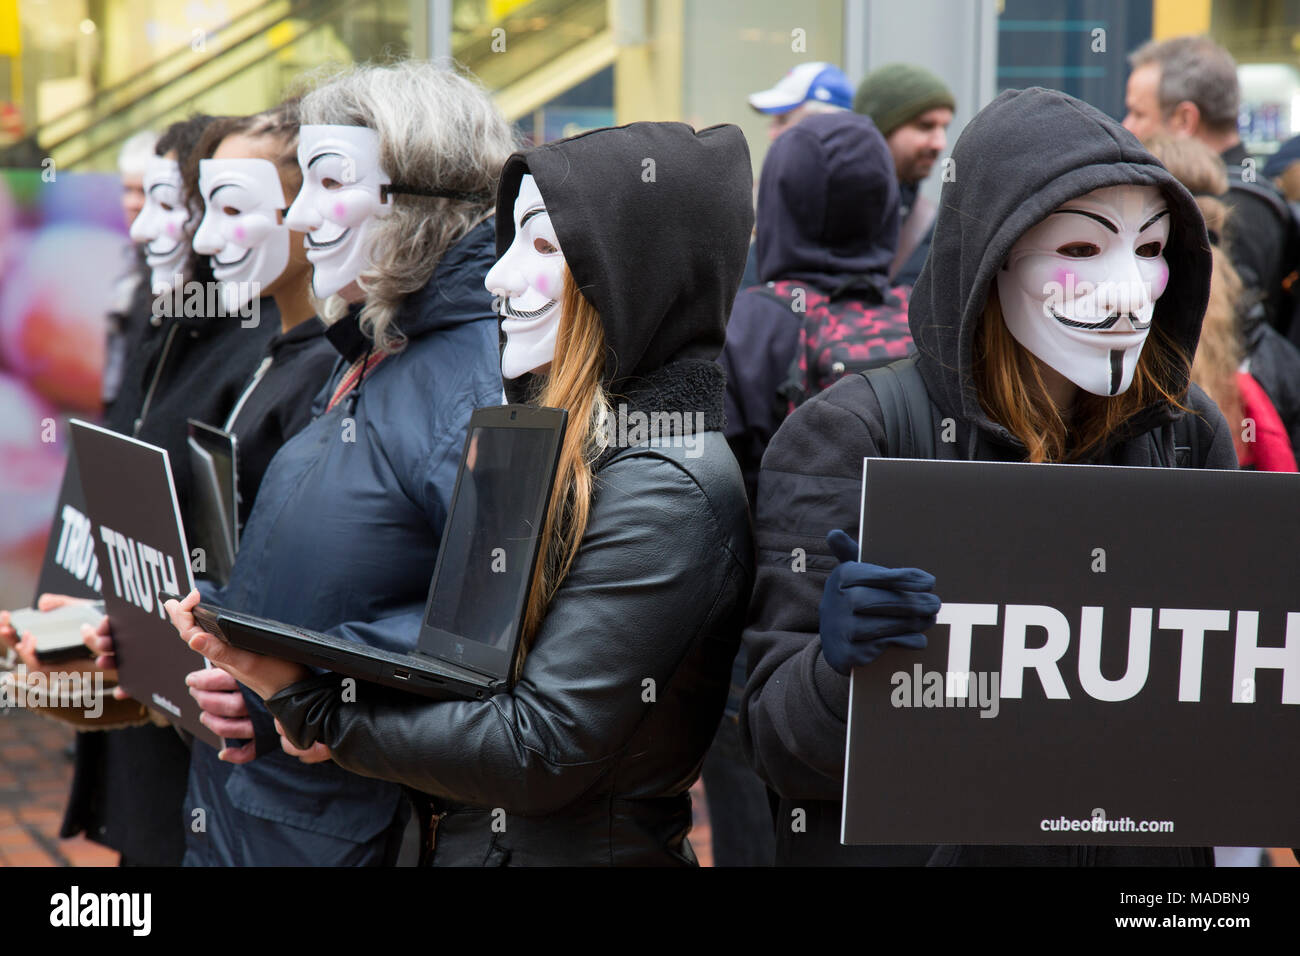 A group of Animal Rights campaigners in Birmingham City Centre, England. The all wore Guy Fawkes type masks and carried placards with the word 'TRUTH' Stock Photo